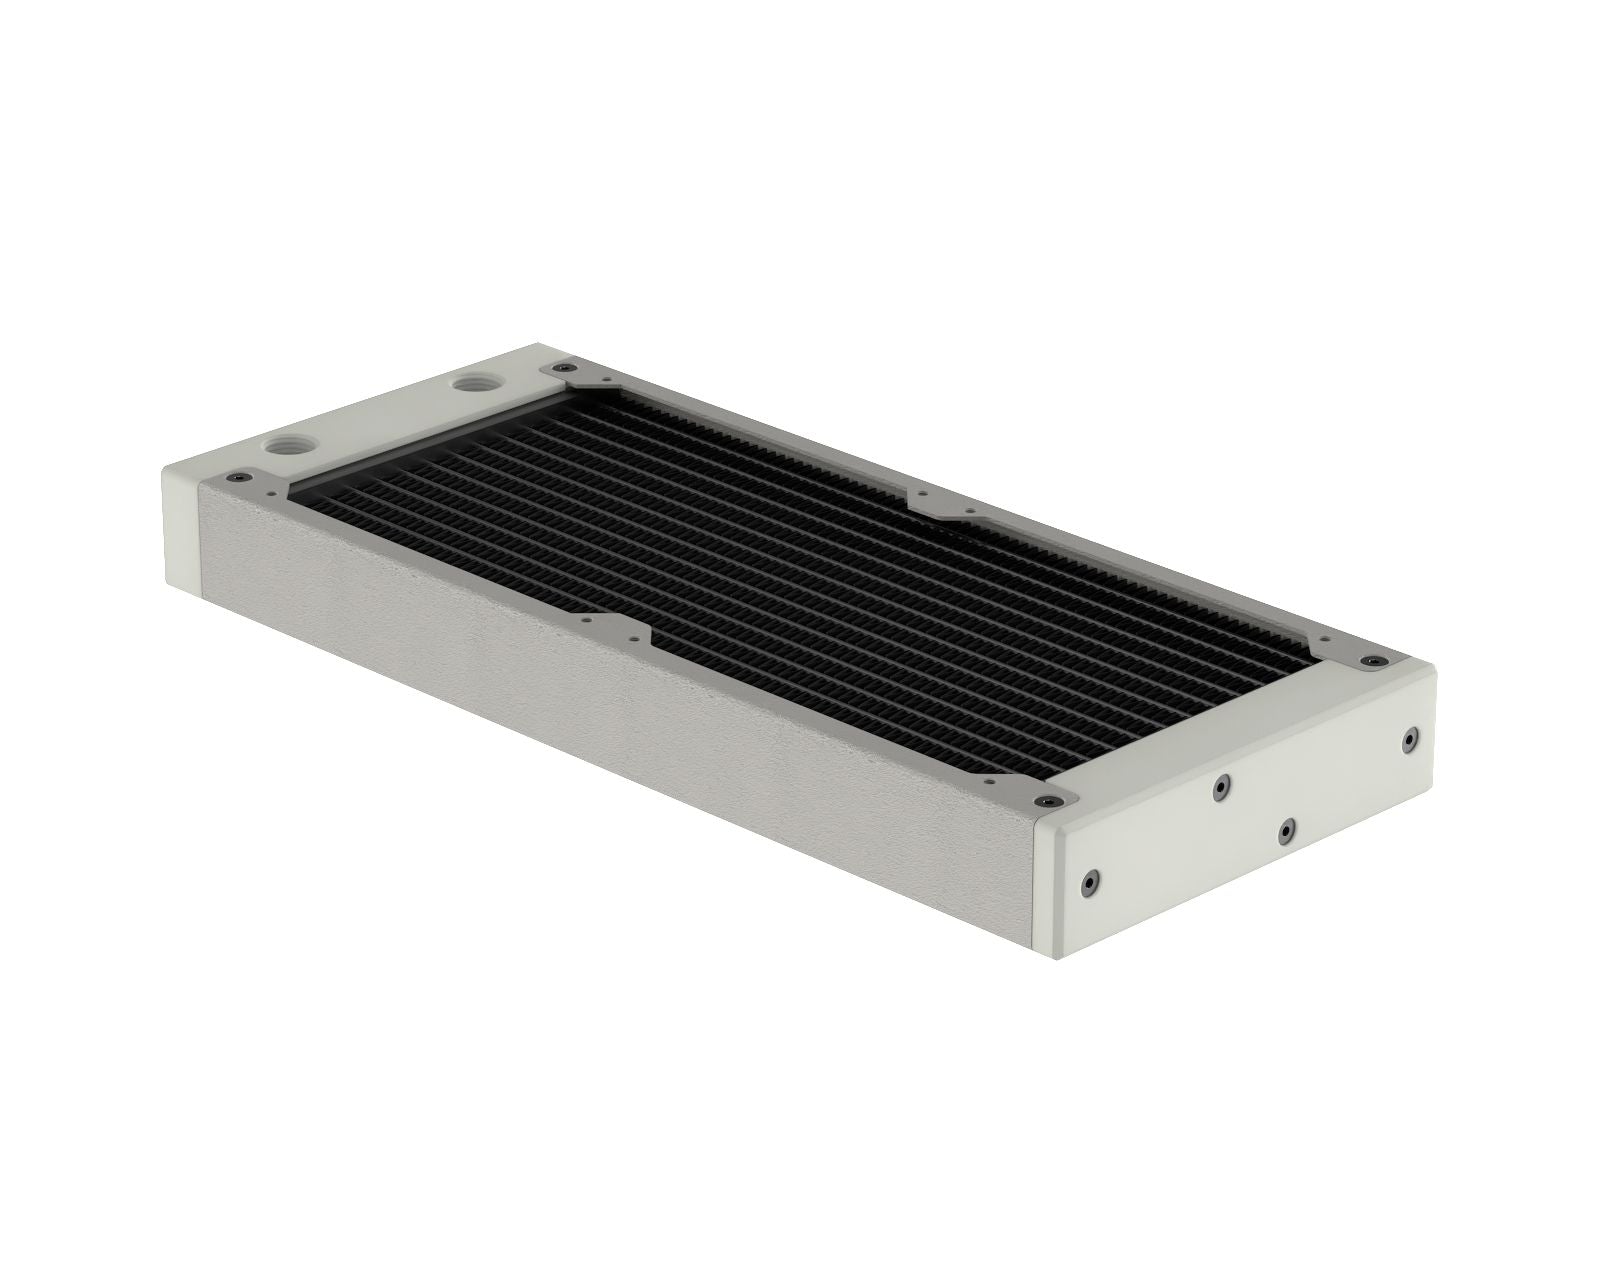 PrimoChill 240SL (30mm) EXIMO Modular Radiator, White POM, 2x120mm, Dual Fan (R-SL-W24) Available in 20+ Colors, Assembled in USA and Custom Watercooling Loop Ready - TX Matte Silver